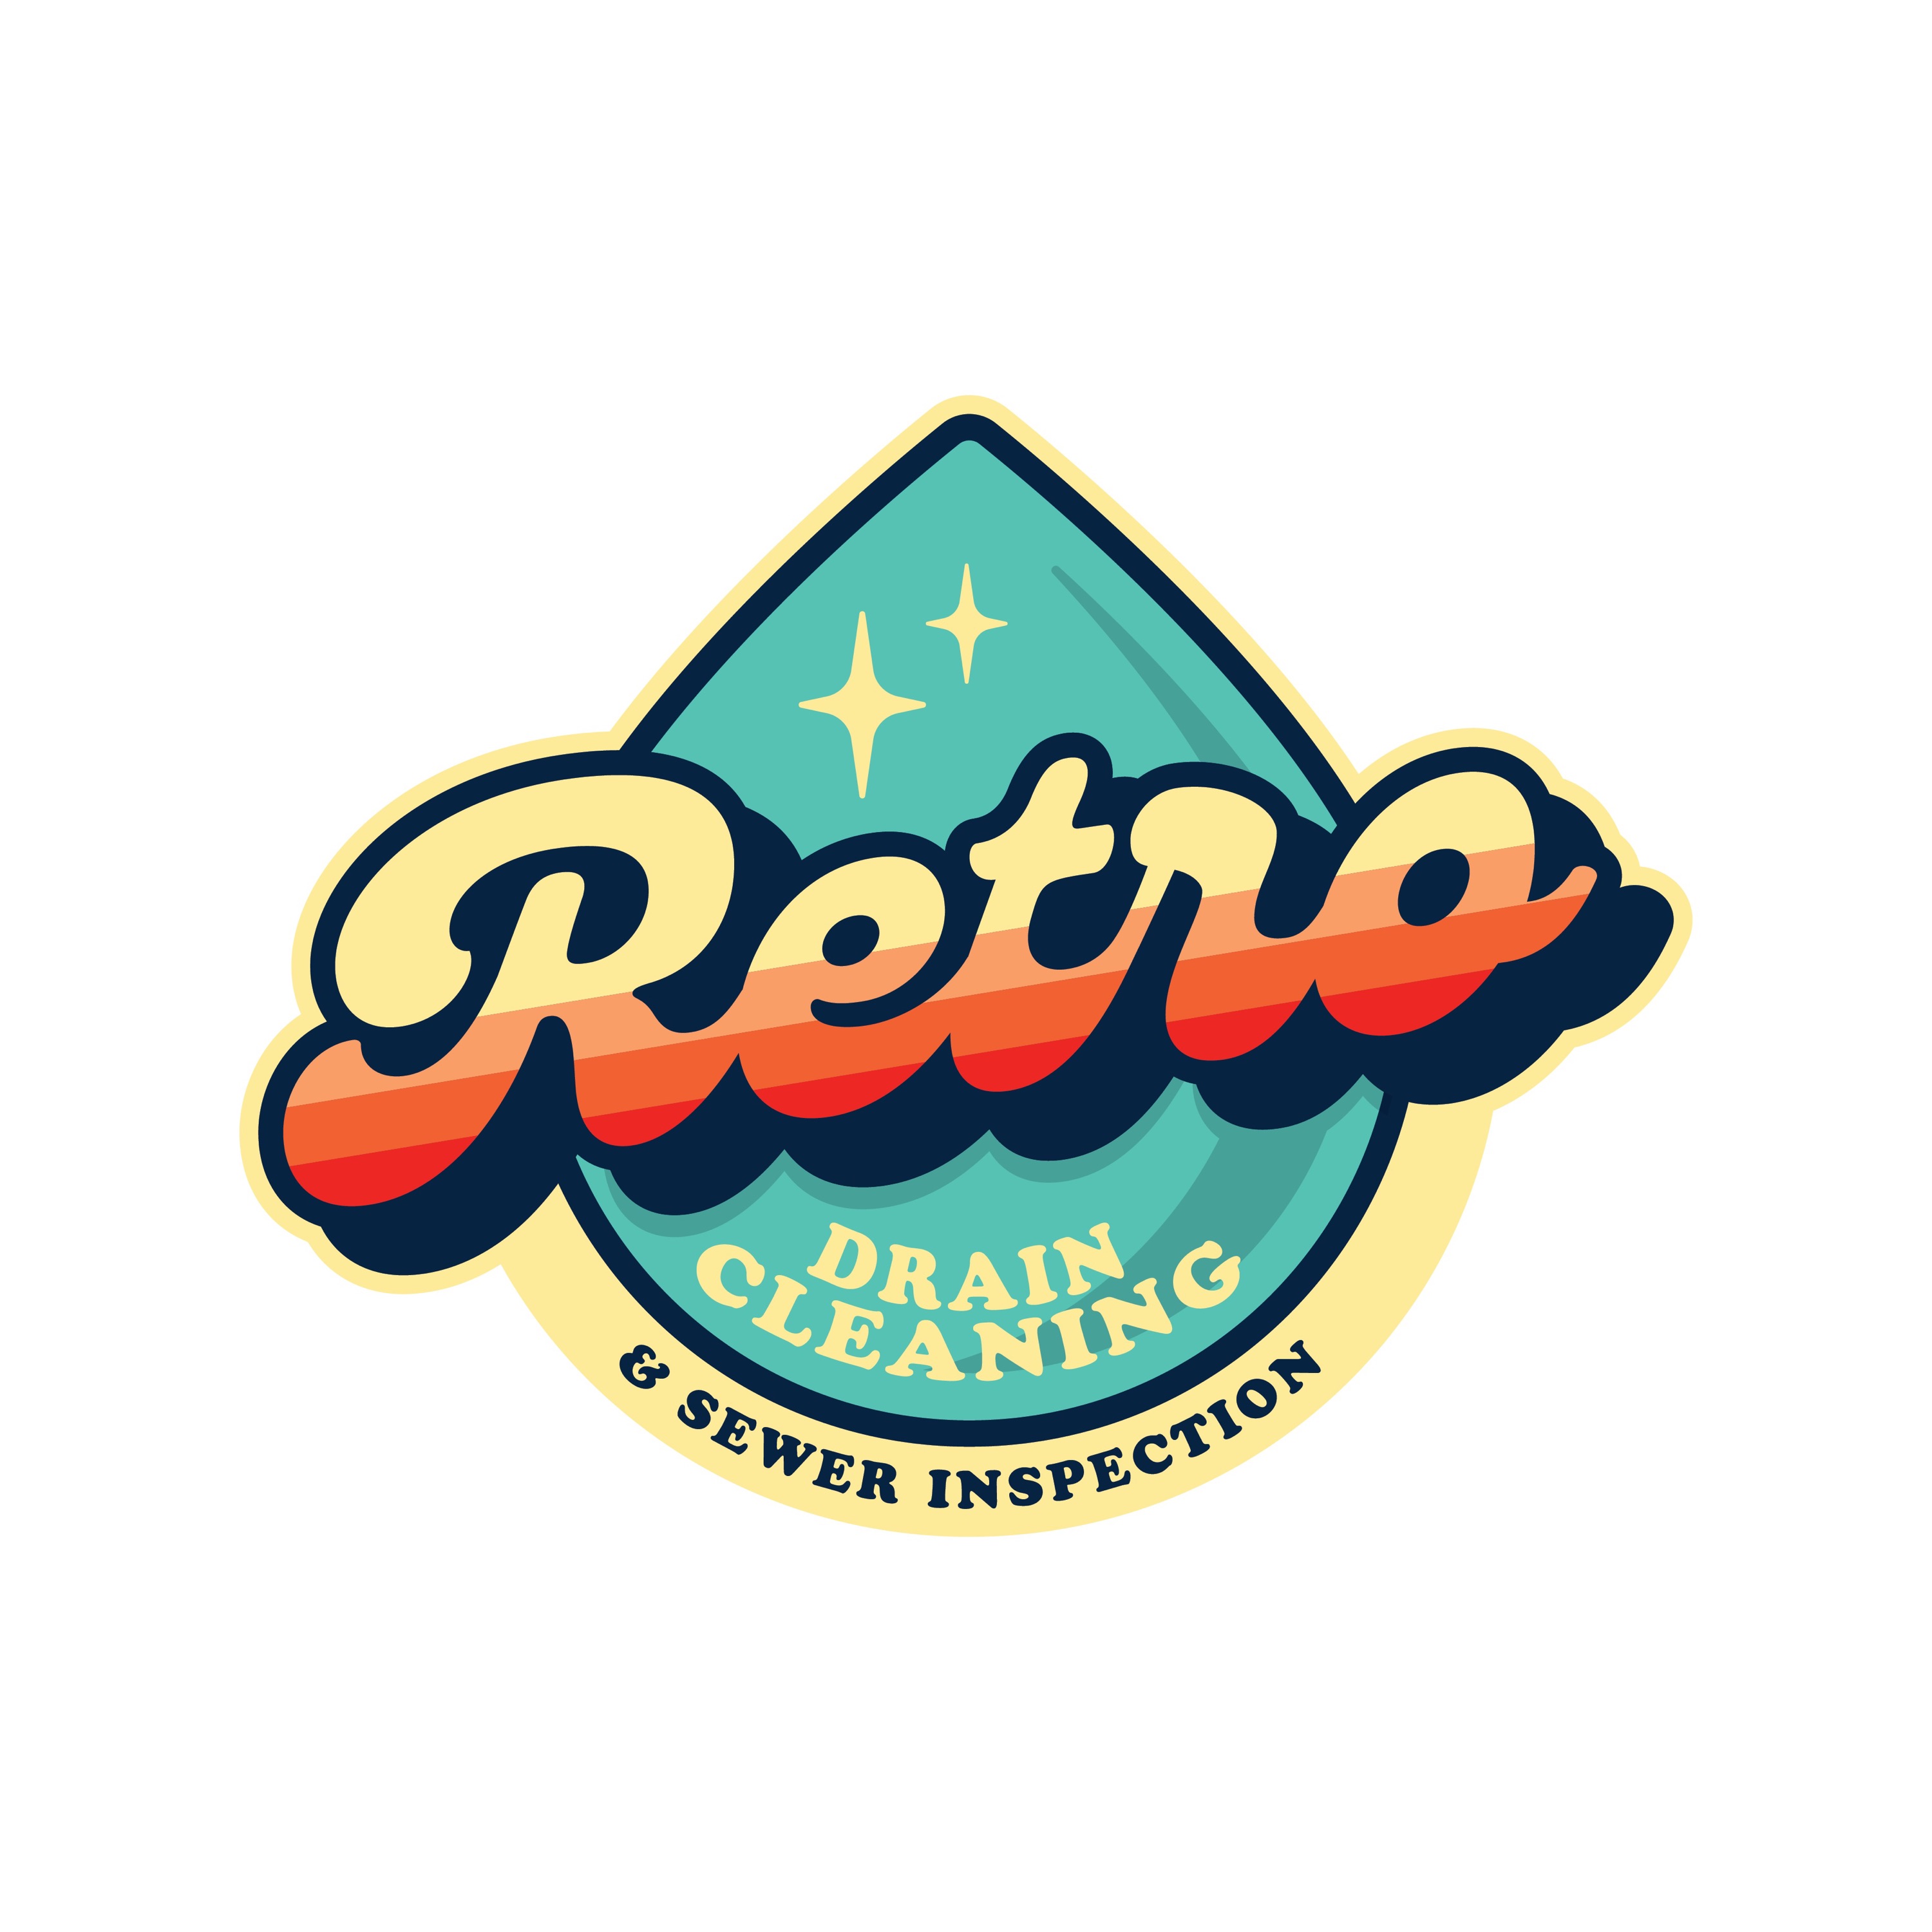 Retro Drain Cleaning & Sewer Inspection Logo